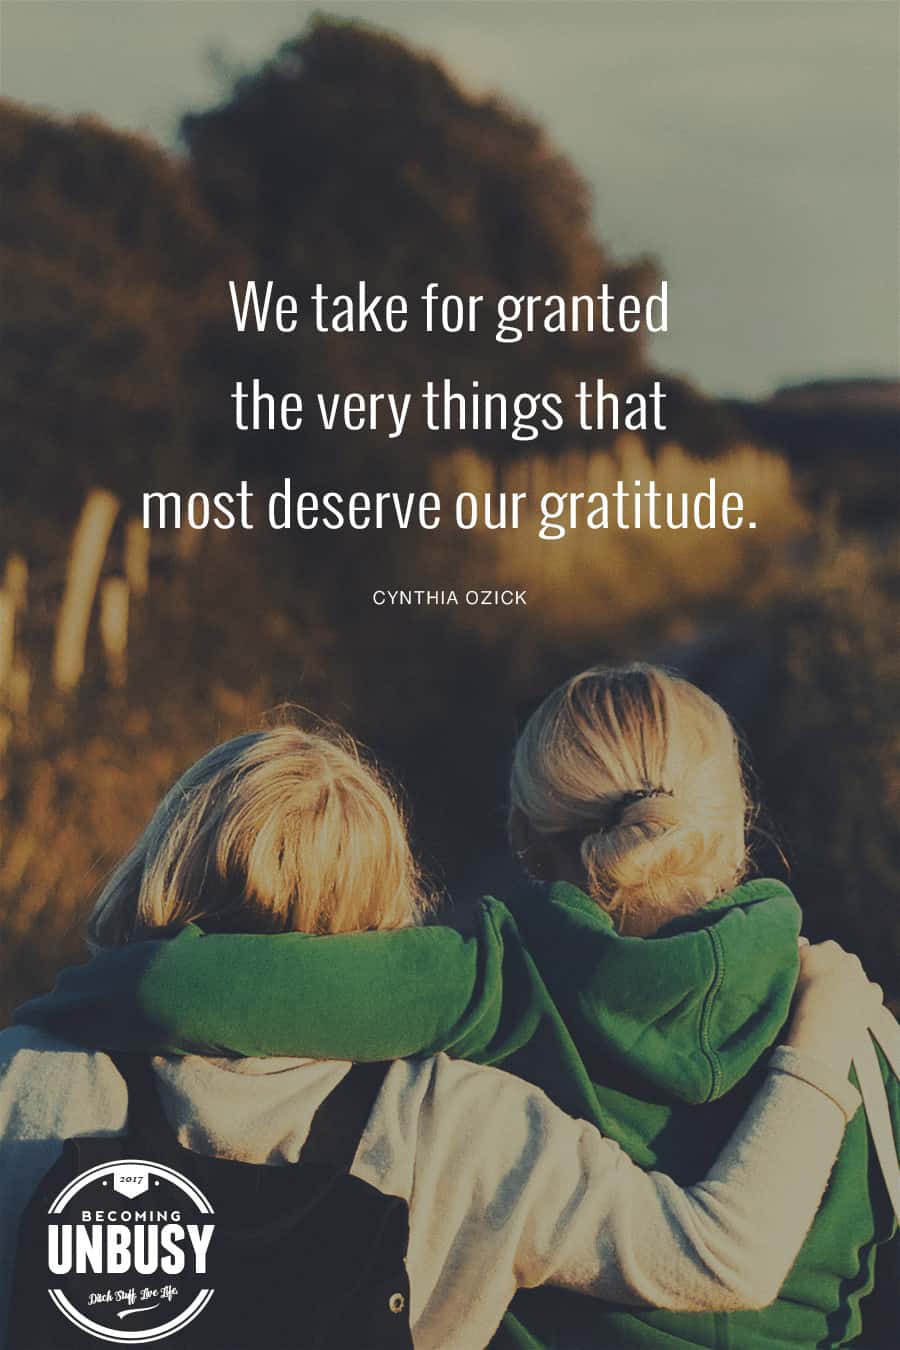 We take for granted the very thing that most deserves our gratitude. #quote #gratitude #BecomingUnBusy *love this video and site